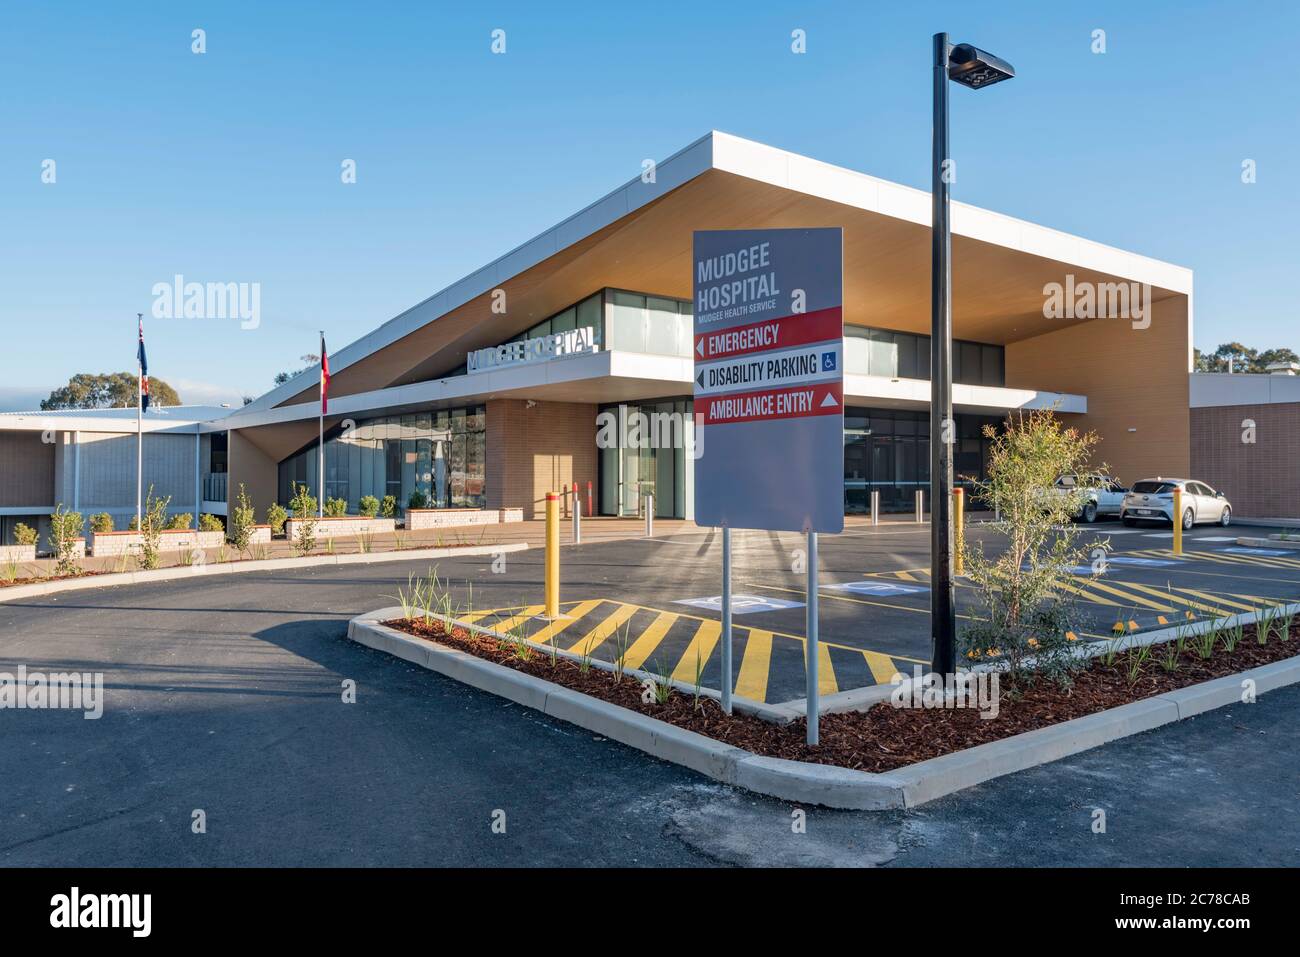 Mudgee, Australia, June 2020: The just opened $A70m redevelopment of the Mudgee (Regional) Hospital in mid western New South Wales, Australia Stock Photo